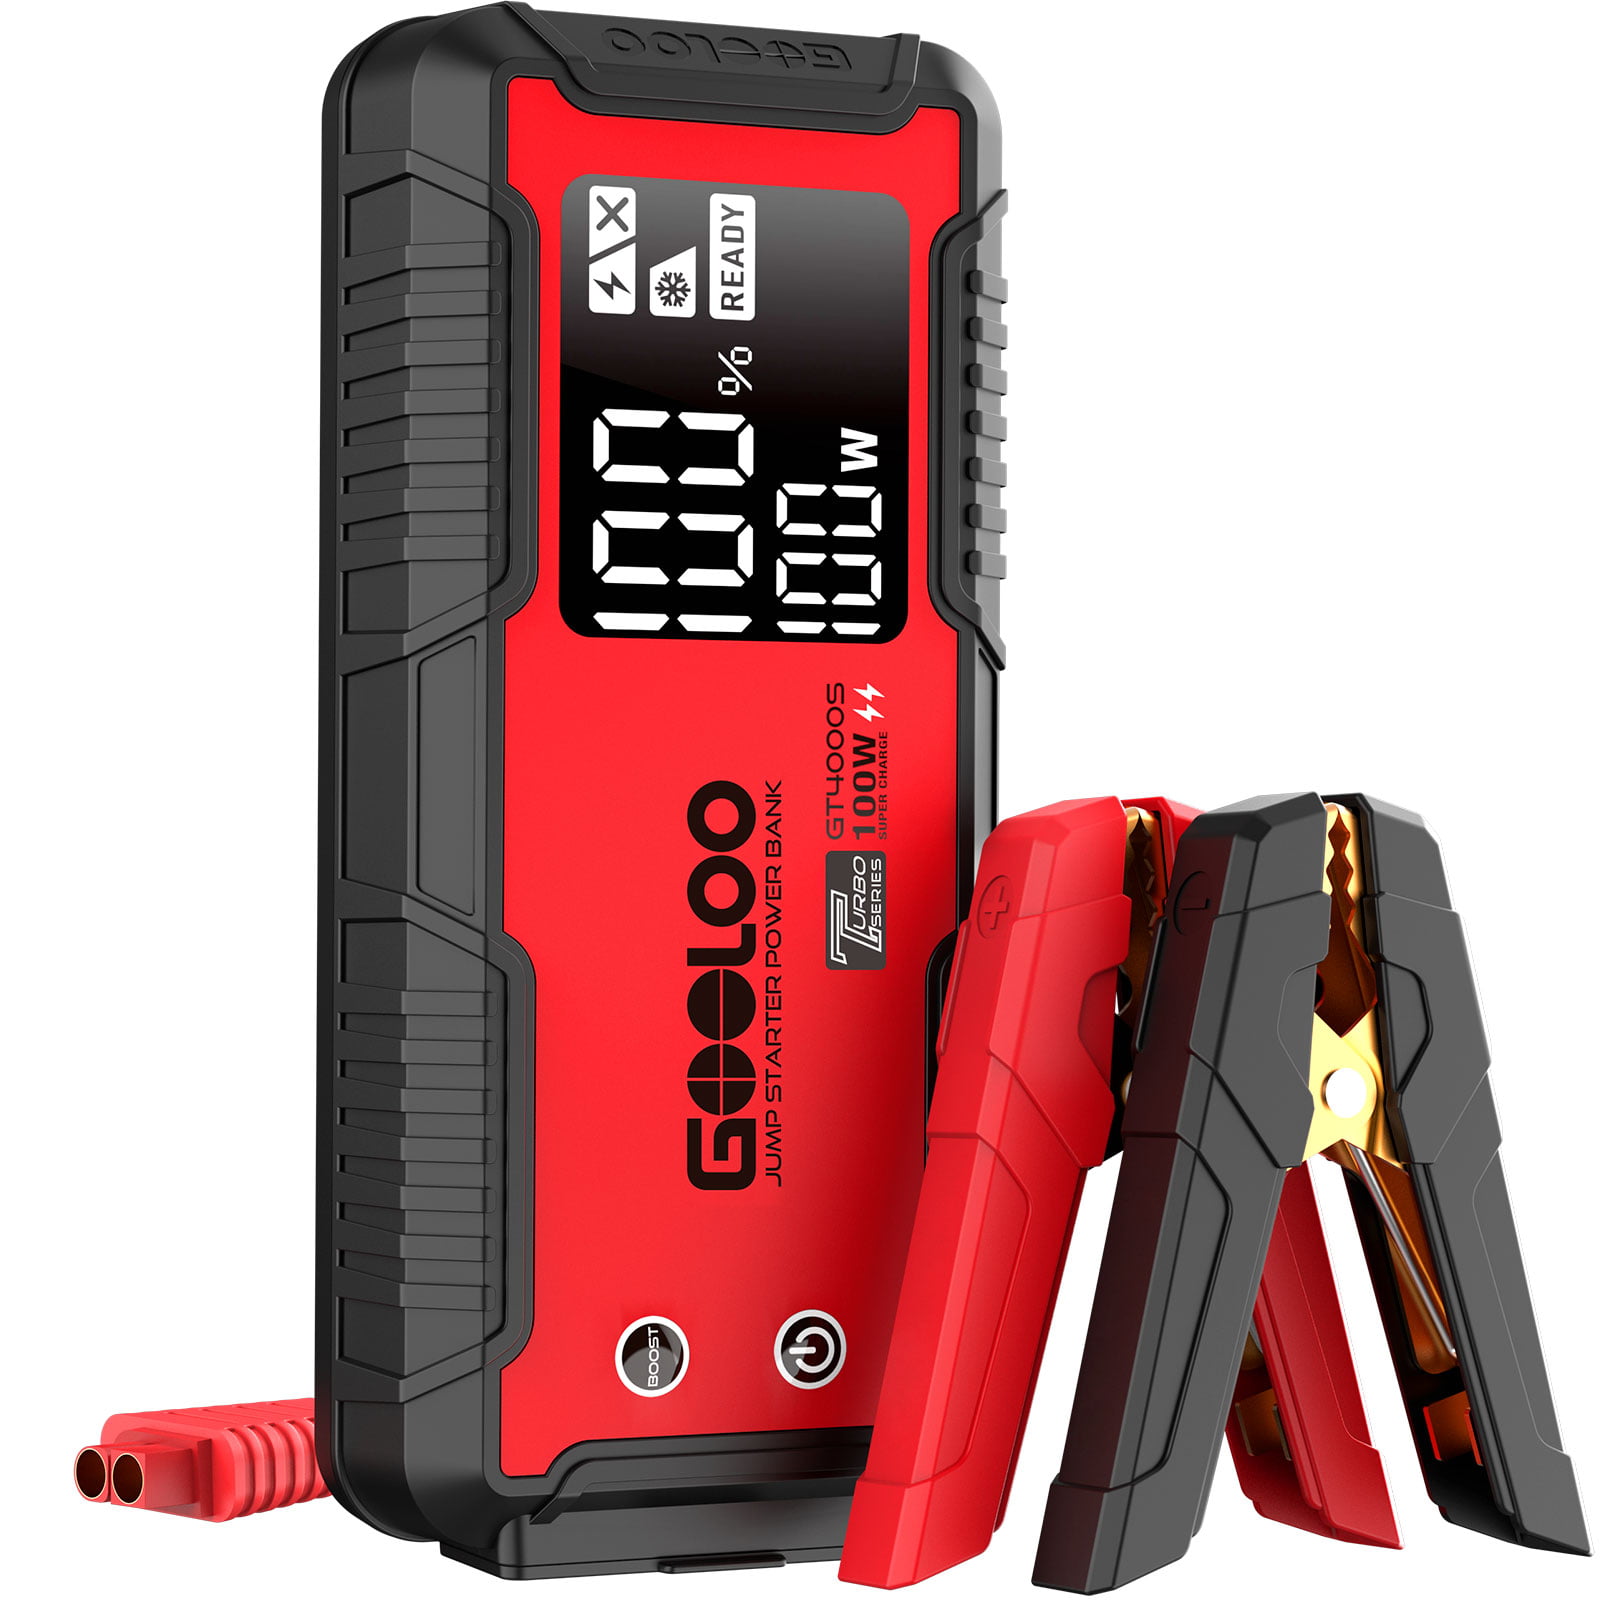 Gooloo Car Jump Starter 2000A Peak USB Quick Charge 3.0 12V Auto Battery Booster 